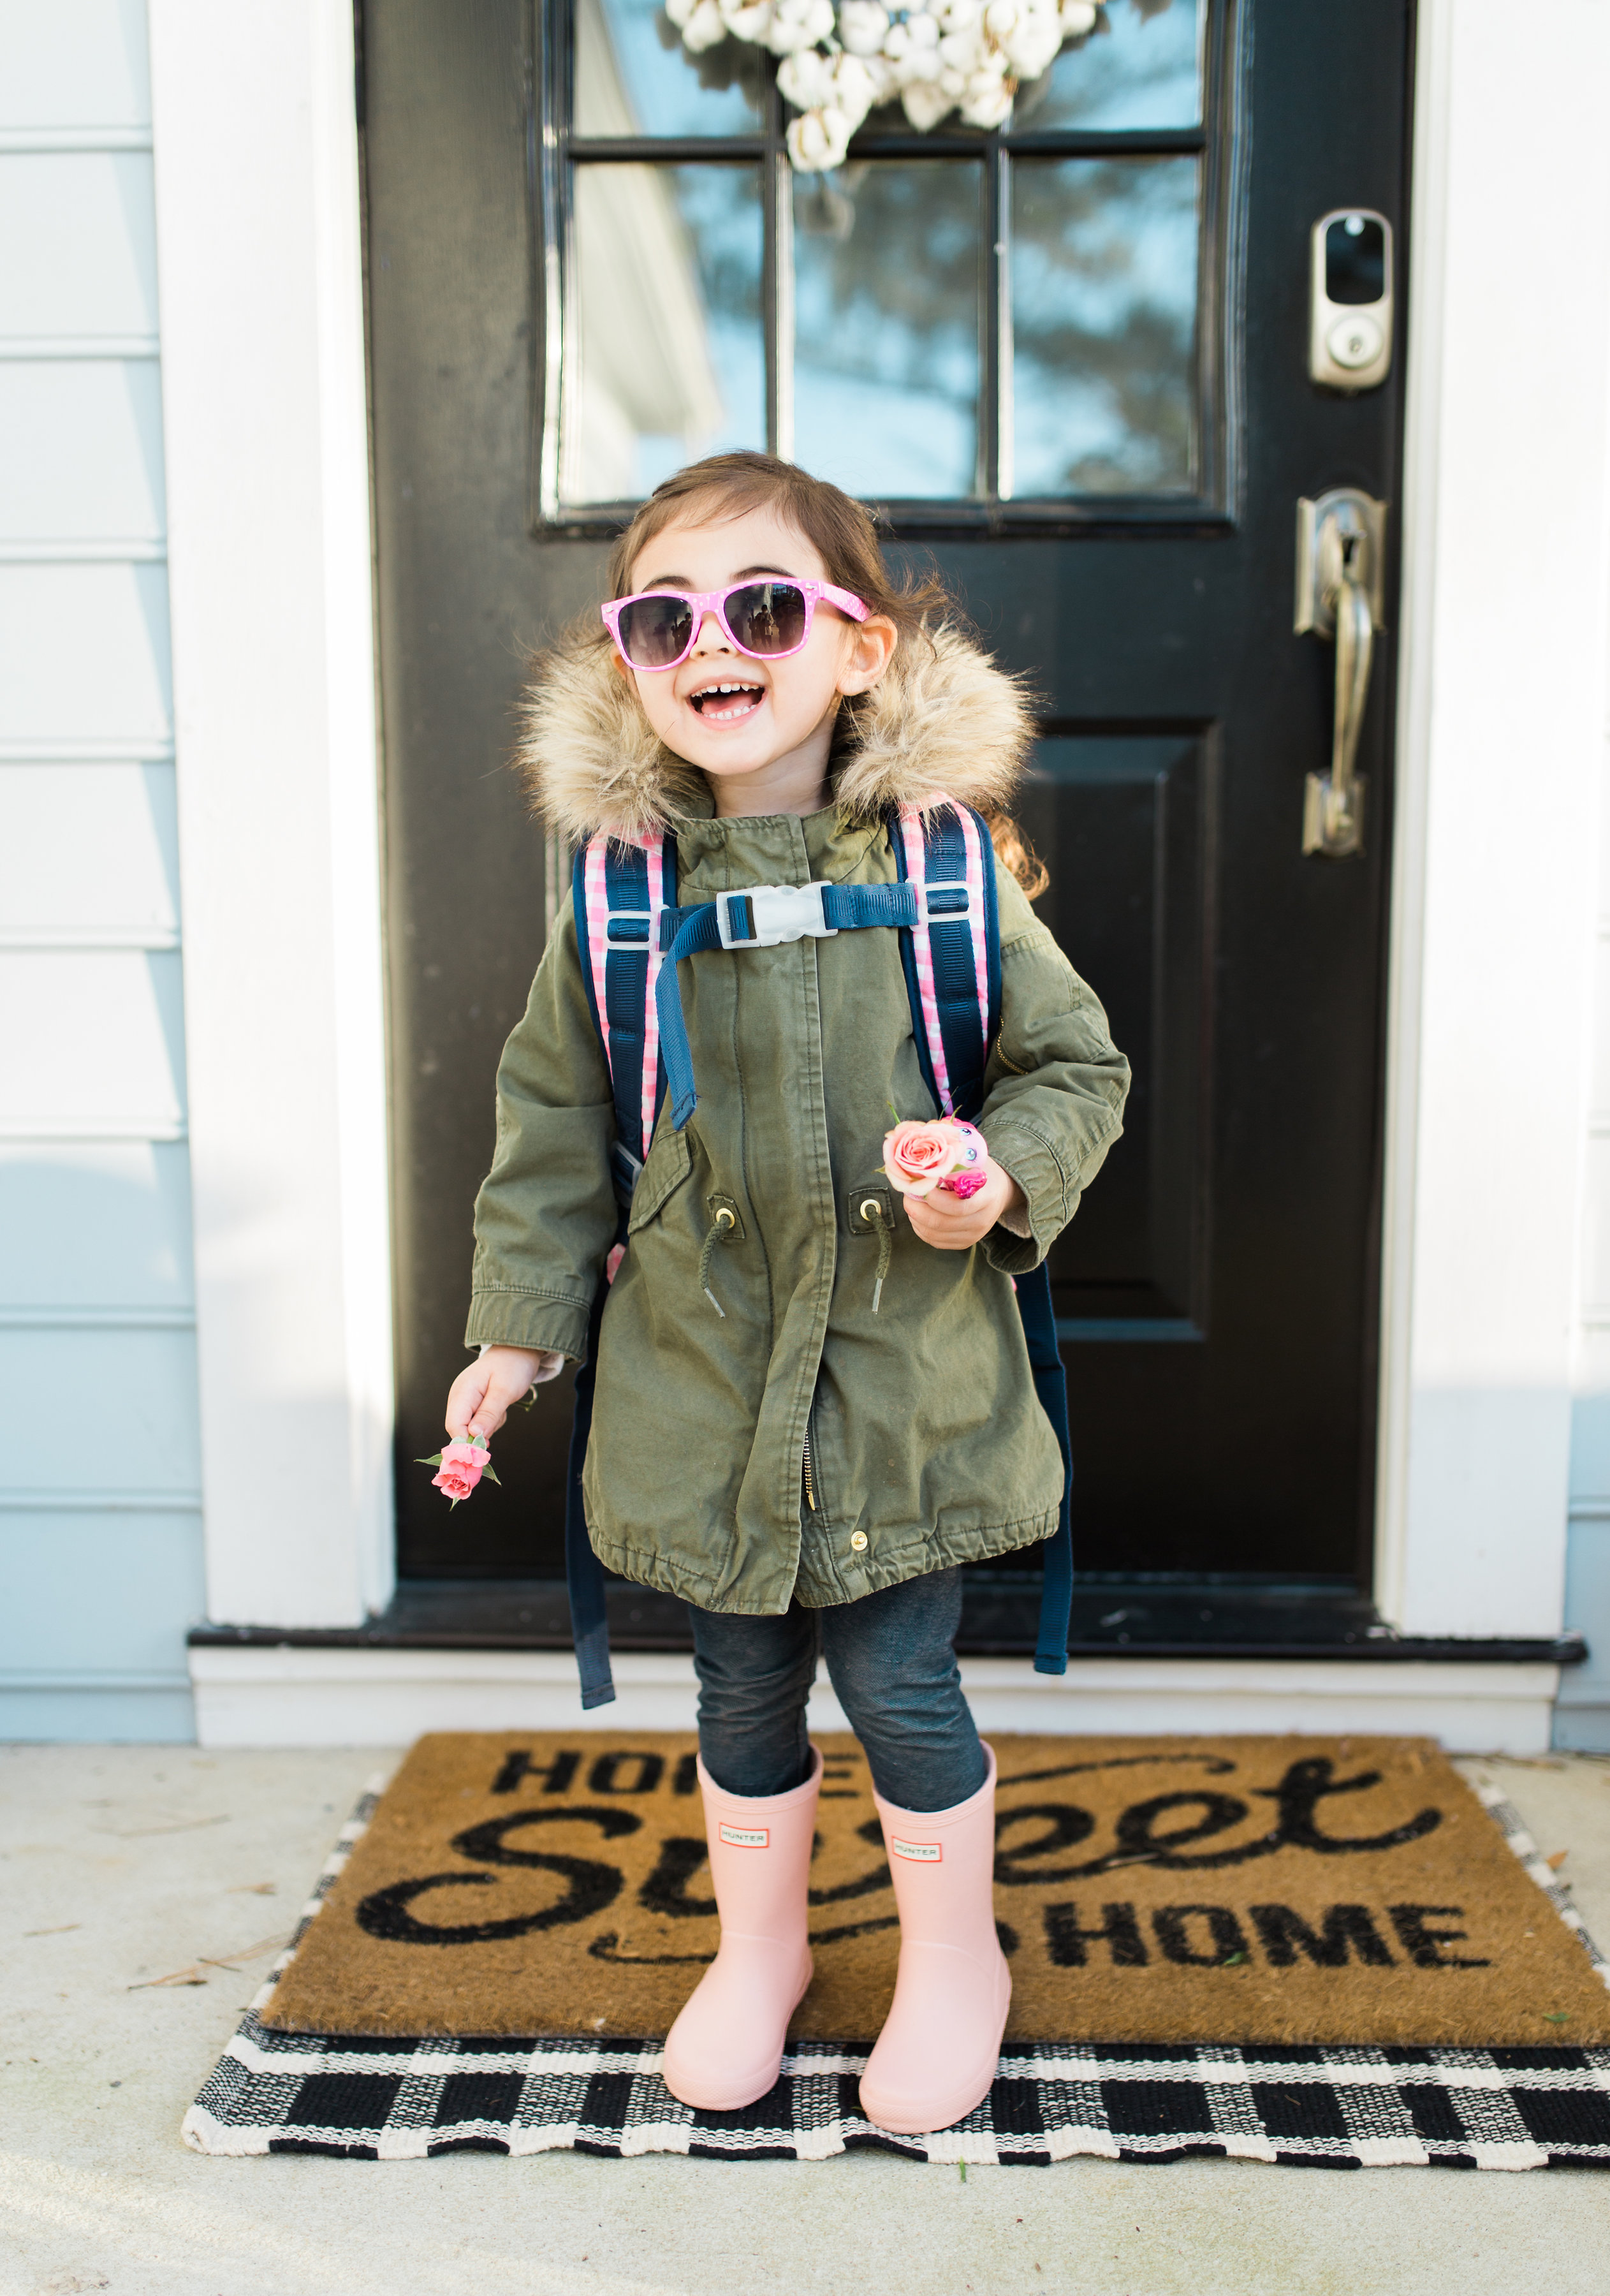 How to choose the perfect preschool that truly fits your family, with 7 easy actionable tips, plus, exactly what questions to ask. | glitterinc.com | @glitterinc - How to Choose a Preschool For Your Child by popular North Carolina lifestyle blogger Glitter, Inc.